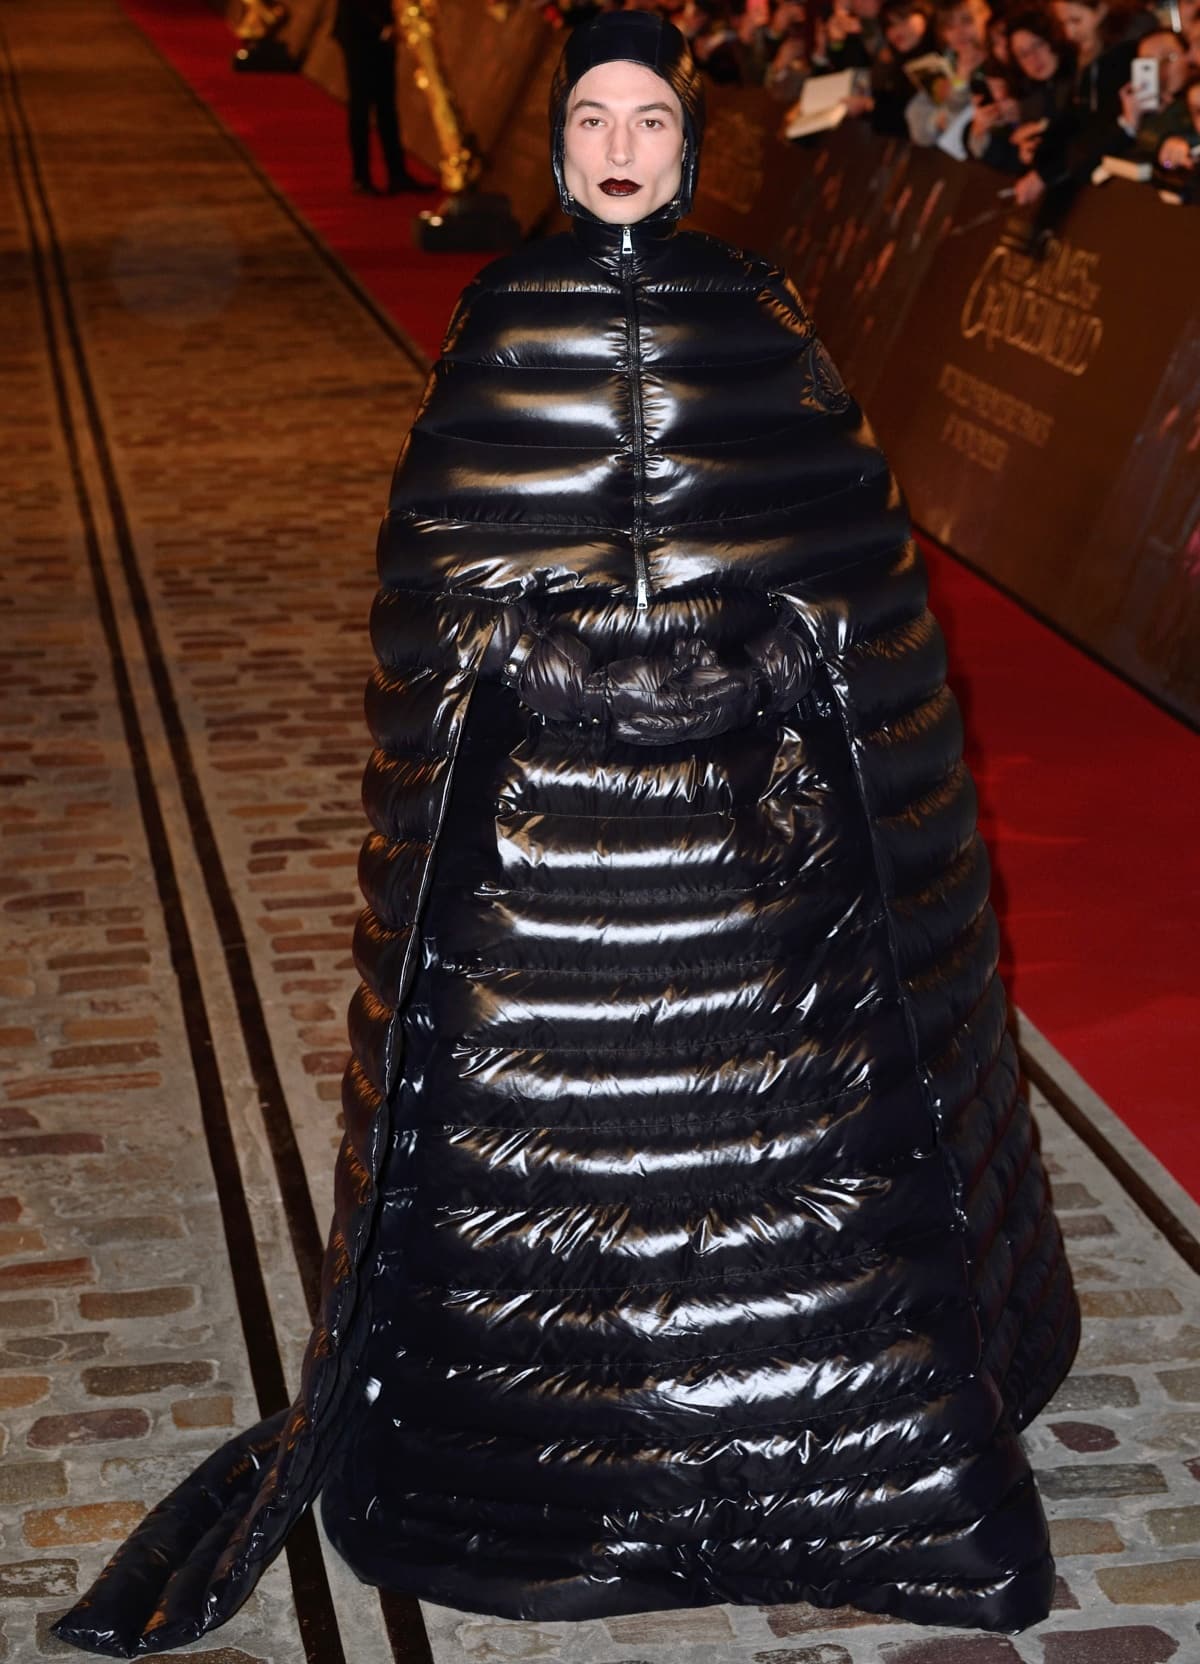 Ezra Miller wearing a black inflatable outfit at the Fantastic Beasts: The Crimes of Grindelwald premiere